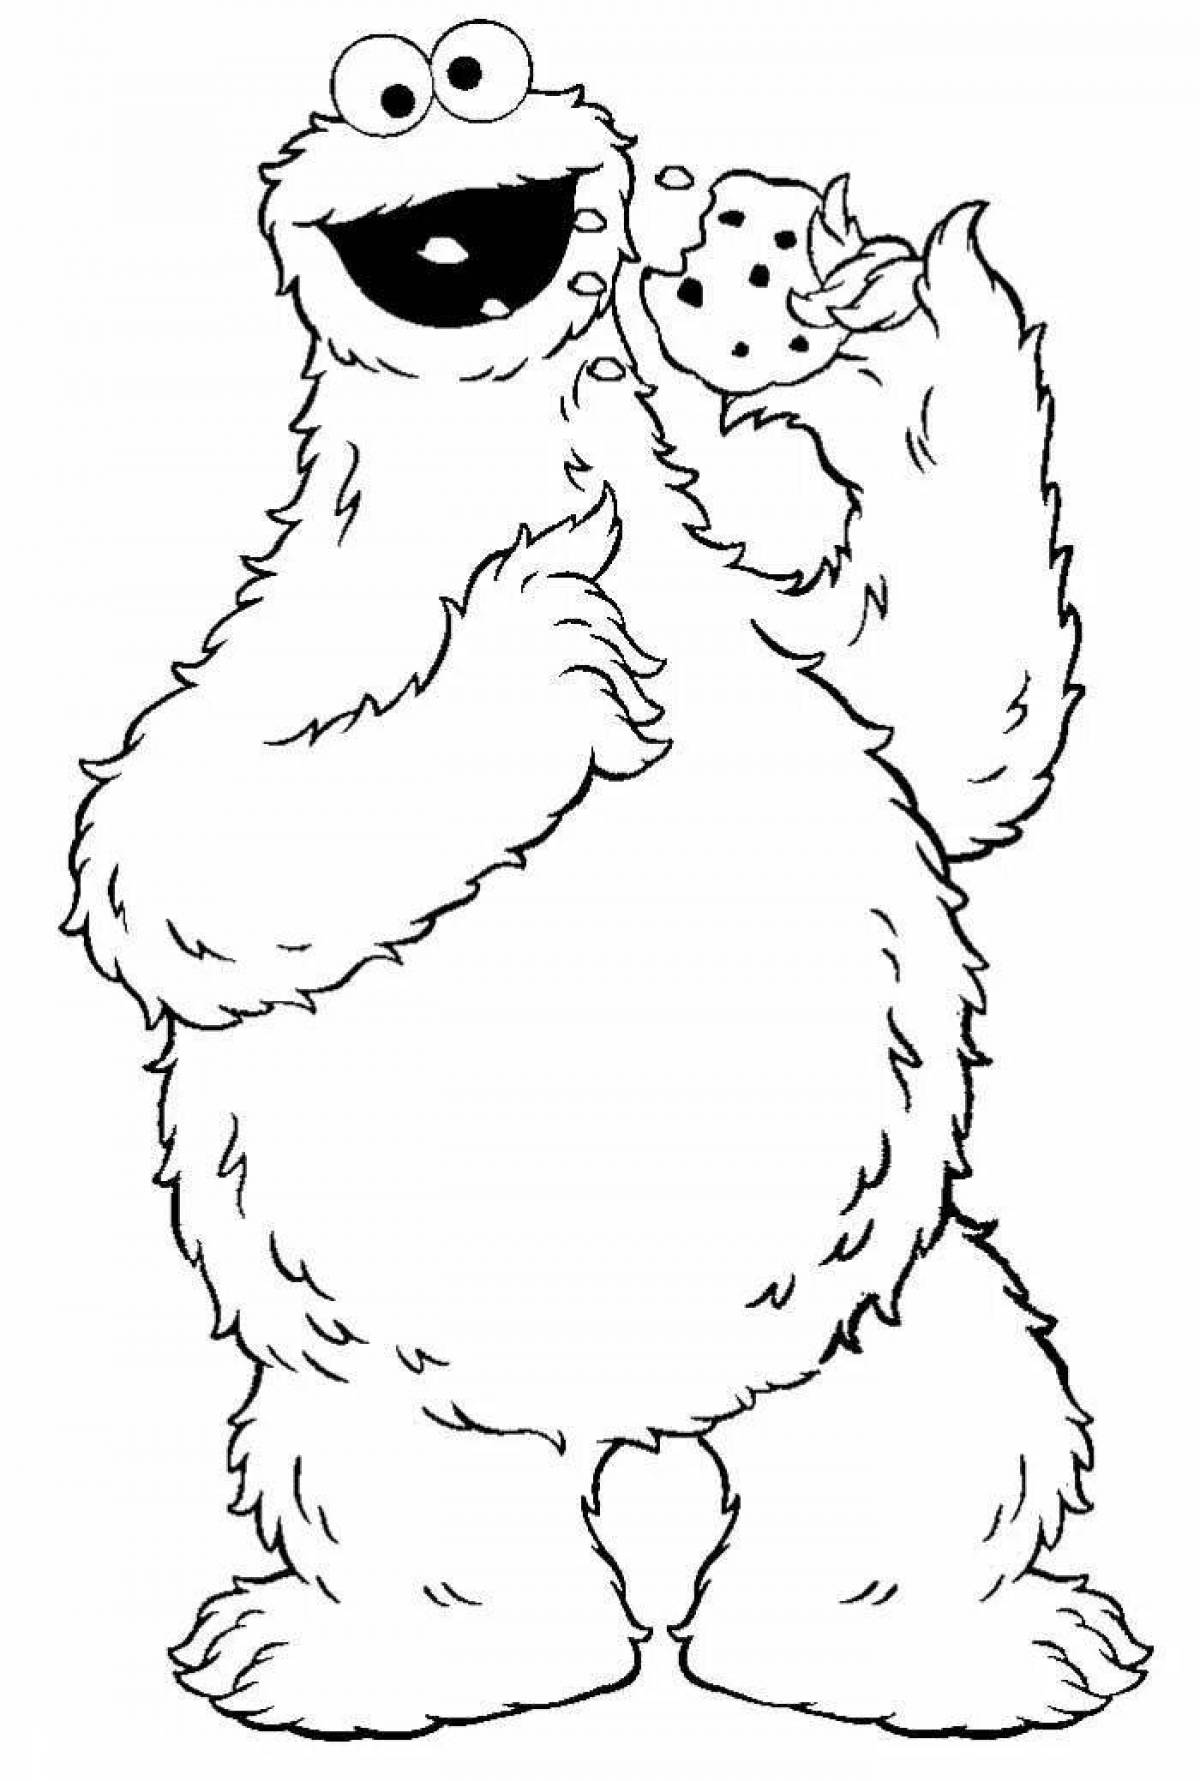 Cozy plush monster coloring page